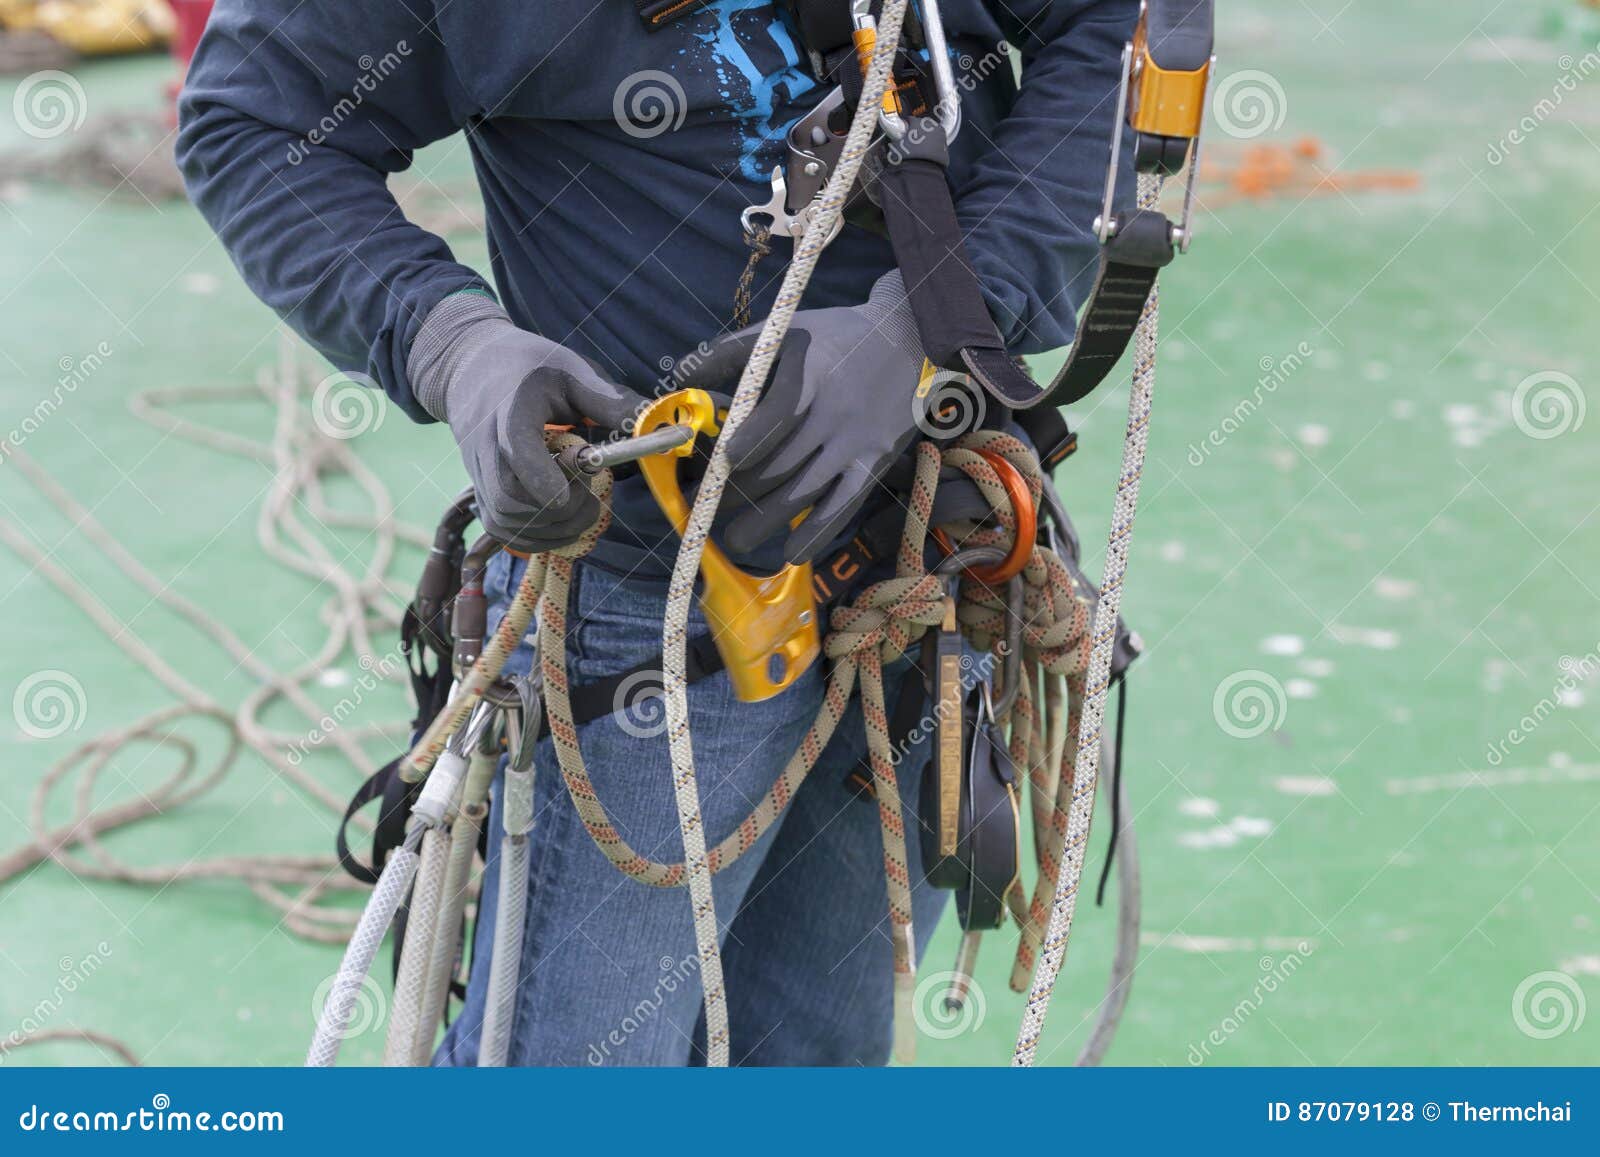 Rope Access Worker are Wearing Equipment Stock Photo - Image of safety,  access: 87079128